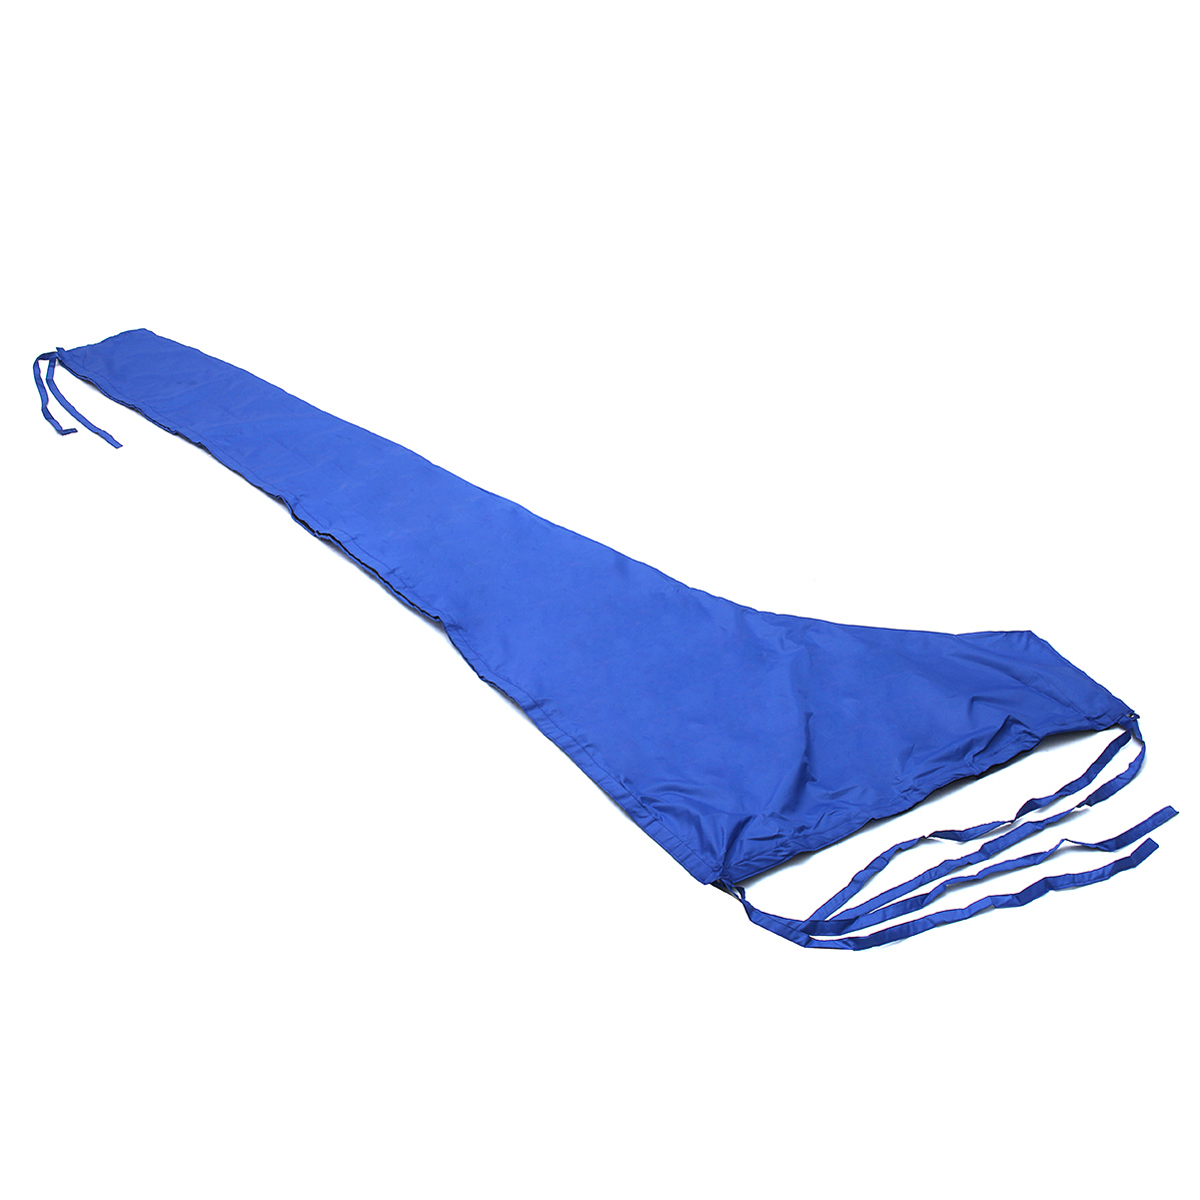 420D 9-10Ft / 11-12Ft / 12-13Ft Mainsail Boom Cover Sail Protector Waterproof Fabric